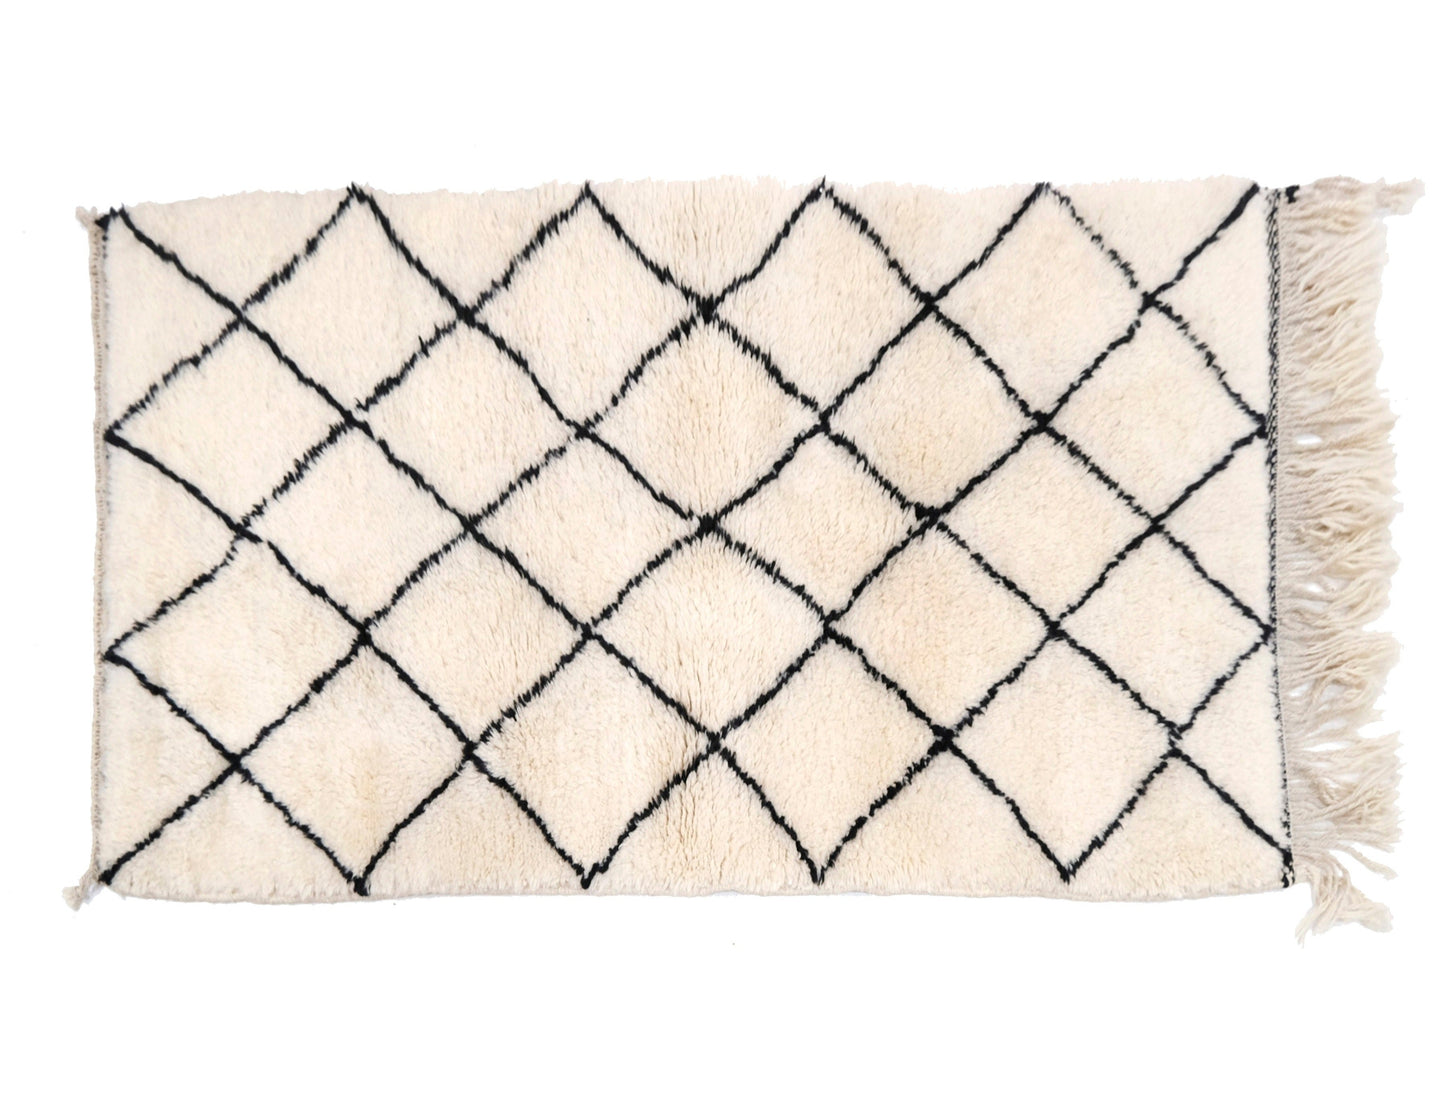 "Woven Dreams: Moroccan Beni Ourain Rugs for Timeless Style"